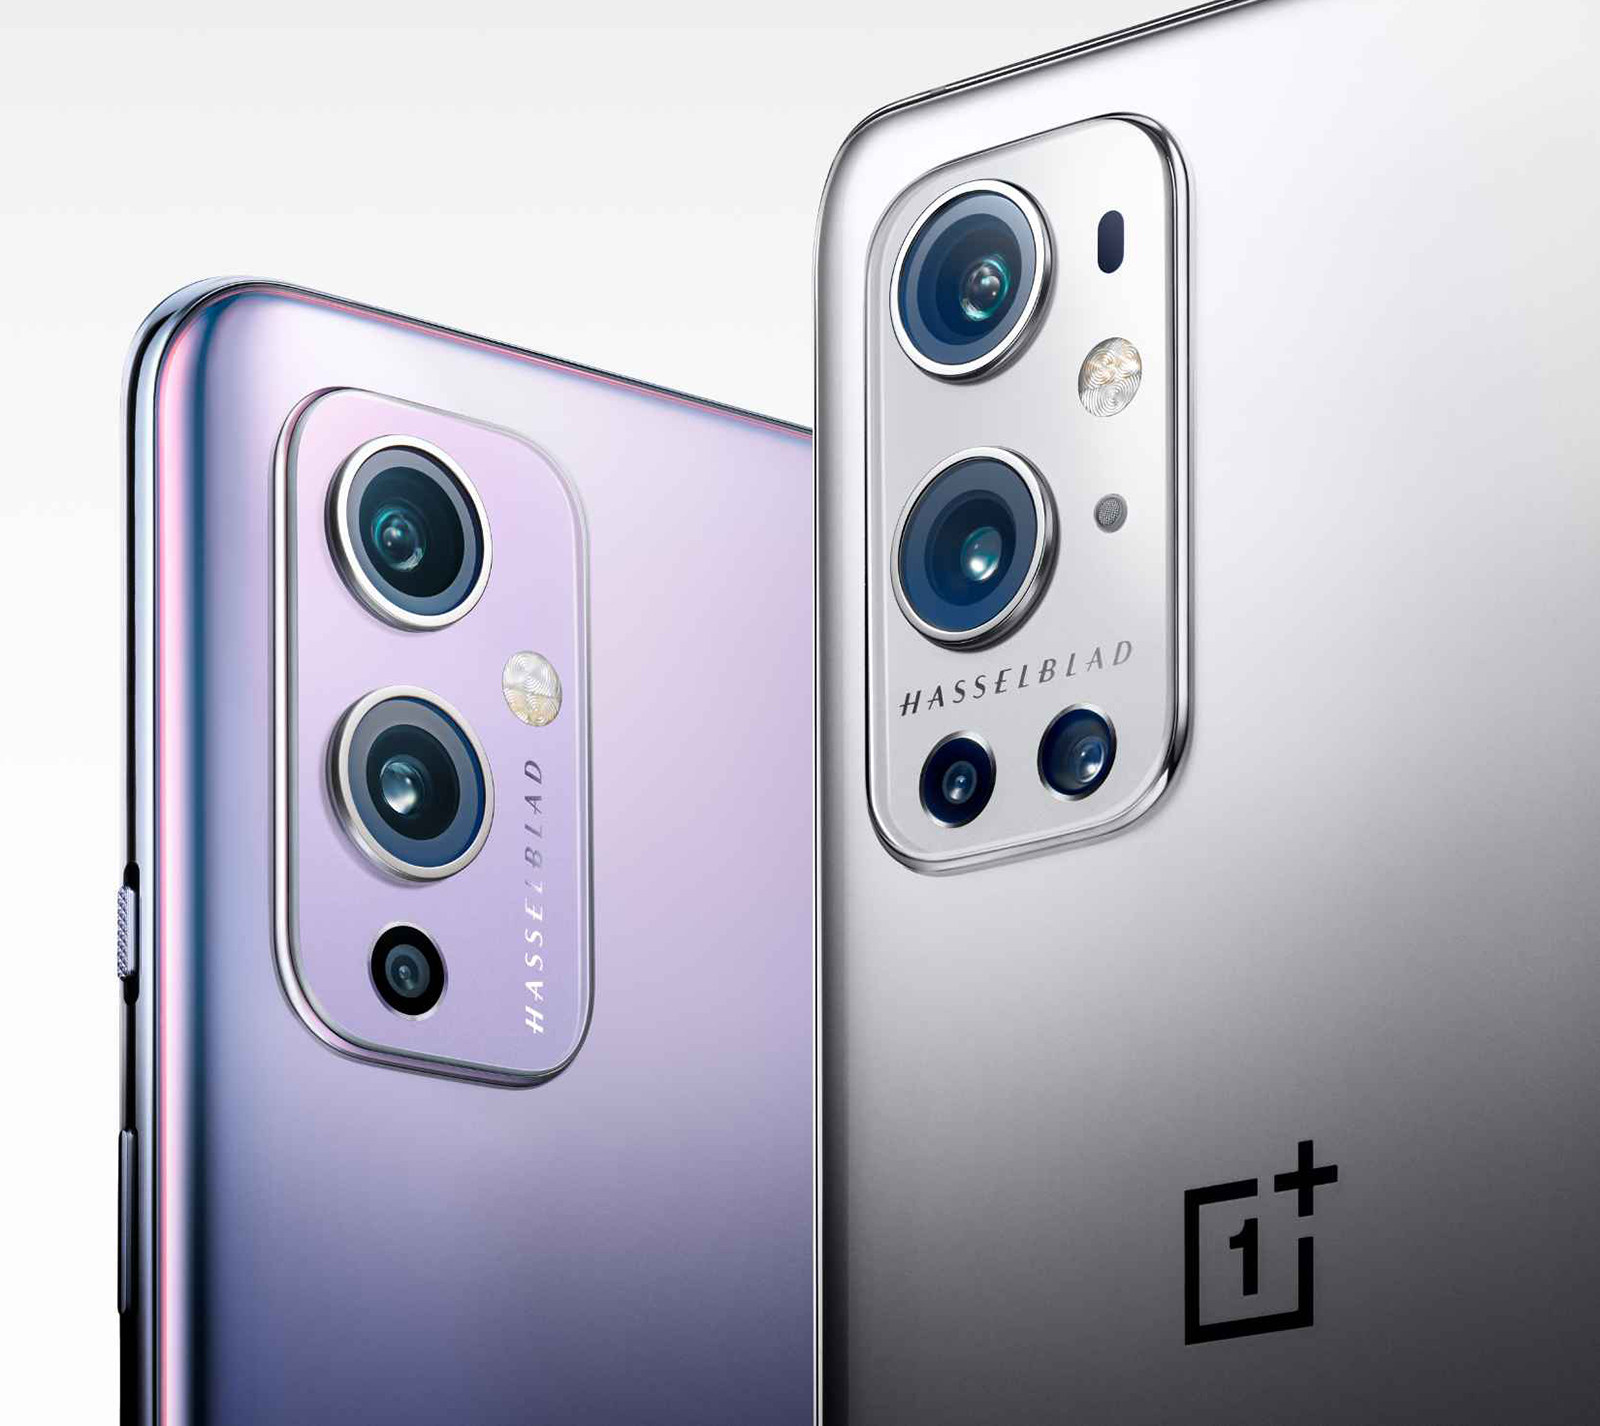 Superfast charging speeds and great cameras make the OnePlus 9 Pro 5G (right) and the OnePlus 9 5G great alternatives to the top flagship phones by Samsung and Apple. Photo: TNS